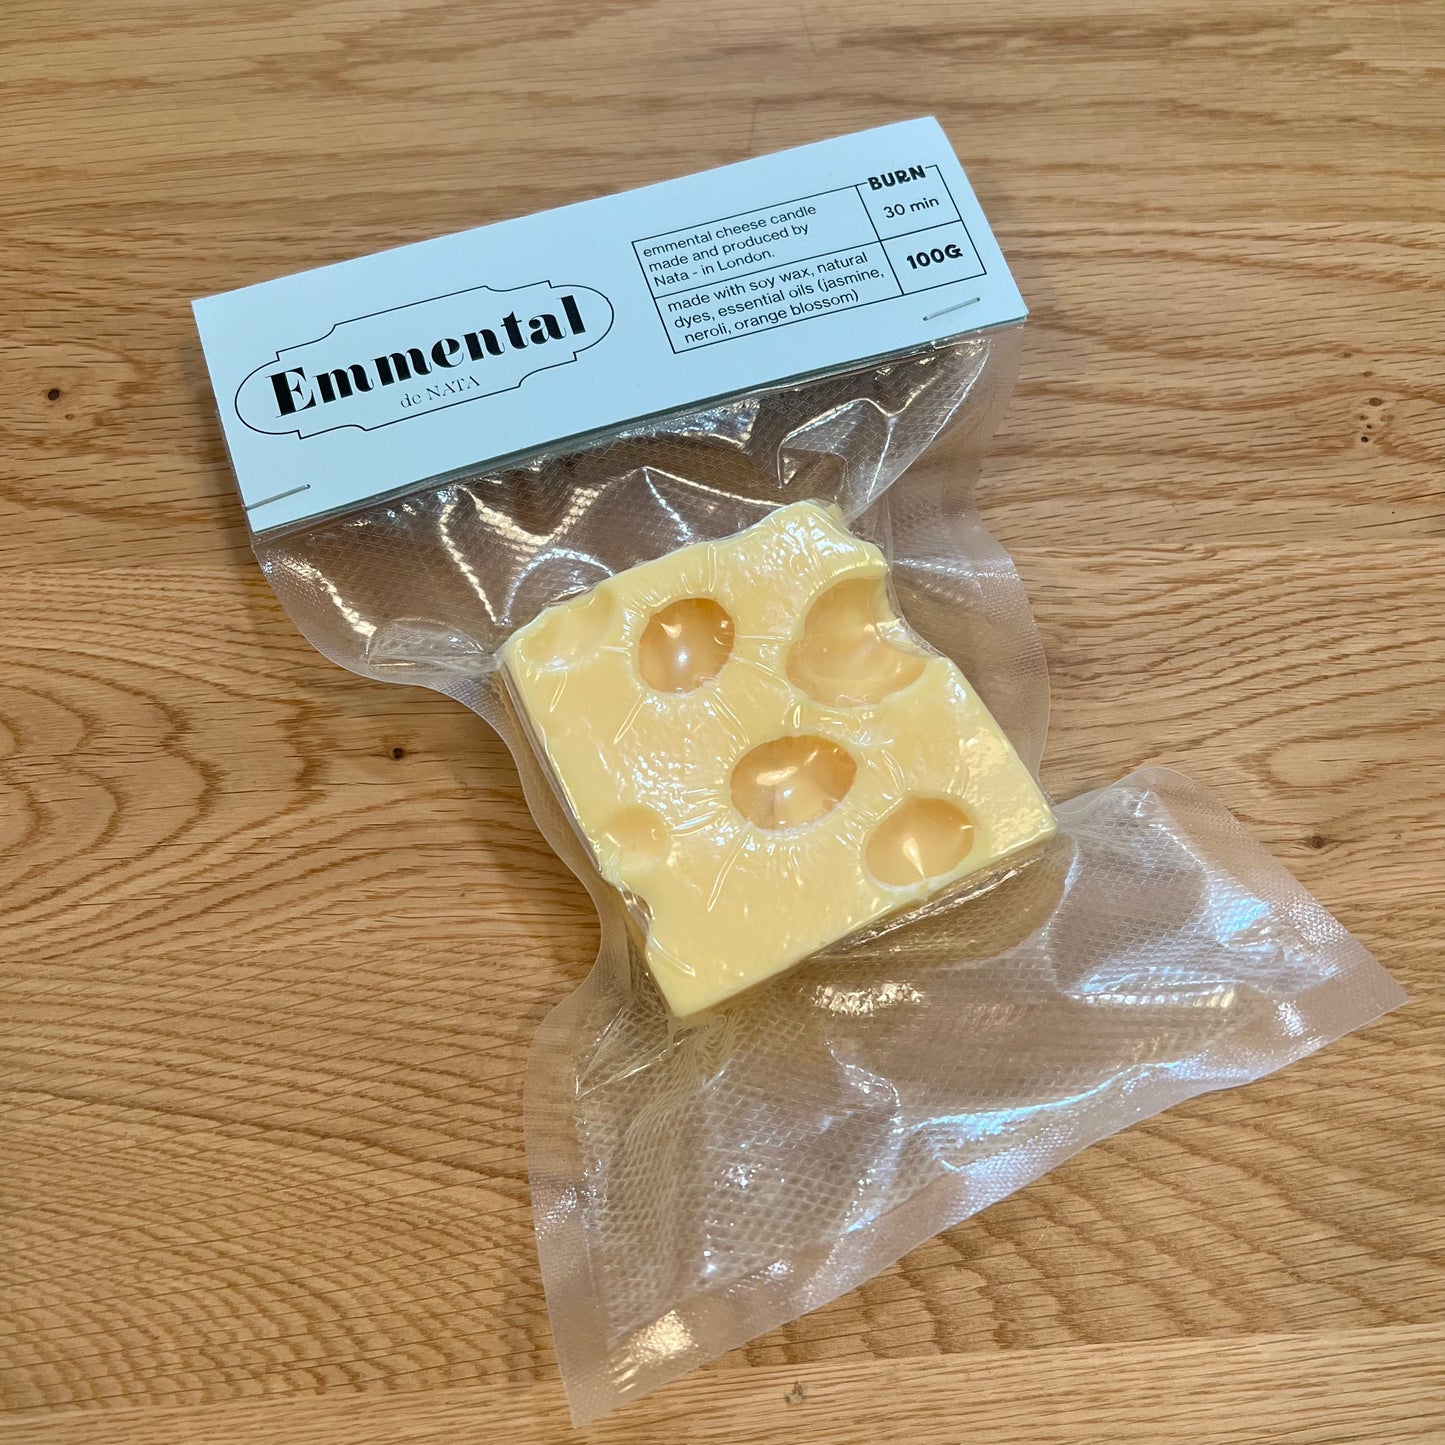 Emmental candle in a food seal bag with blue label.